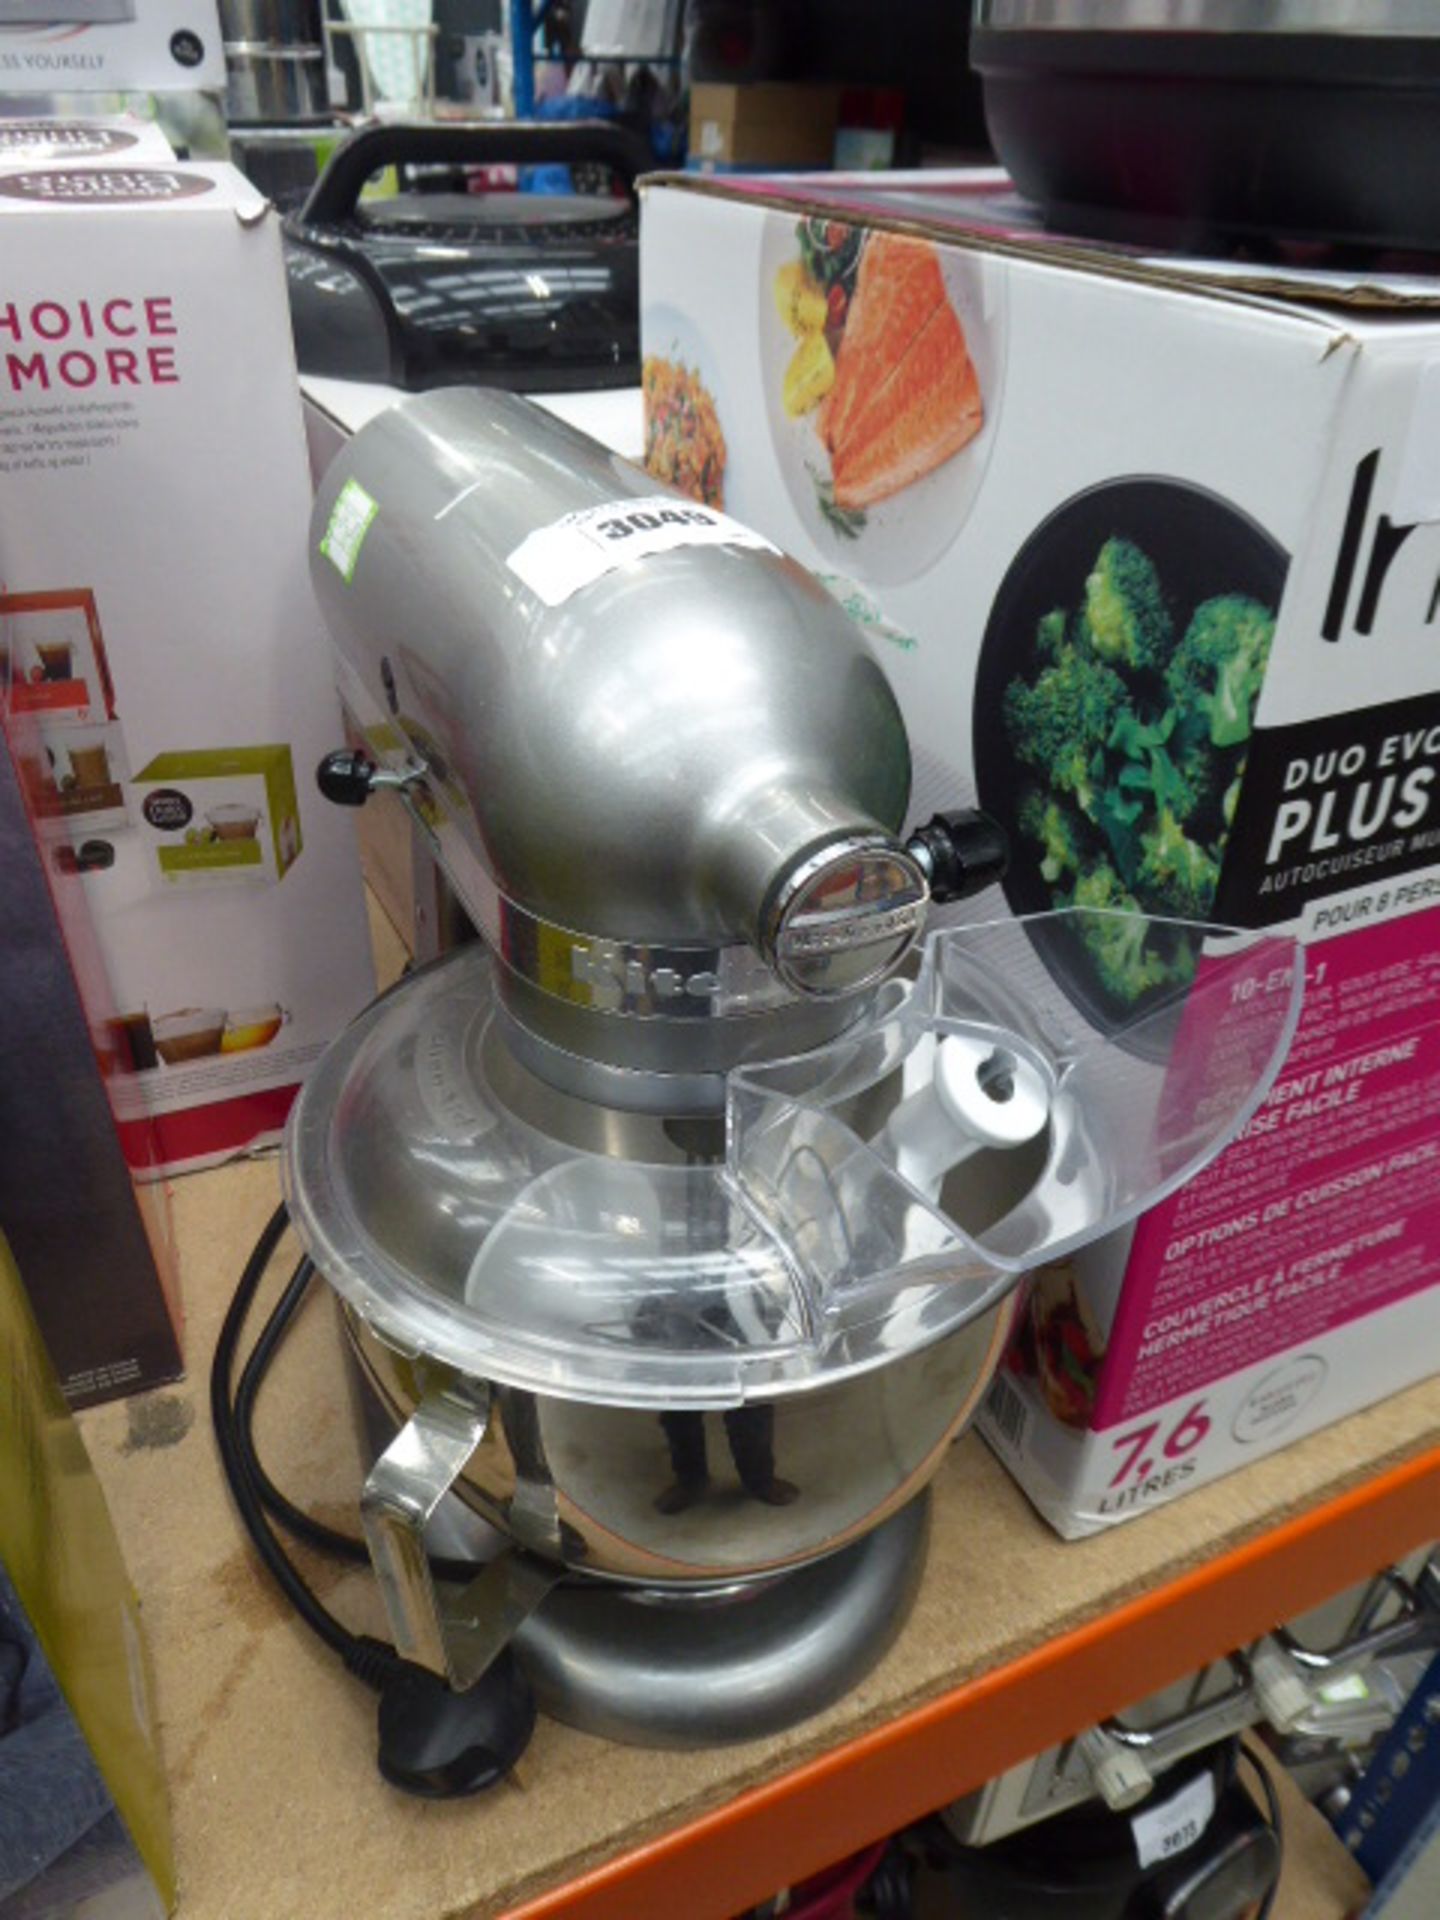 (TN18) - Unboxed Kitchen Aid standing mixer with bowl and three attachments Item is used, has cake